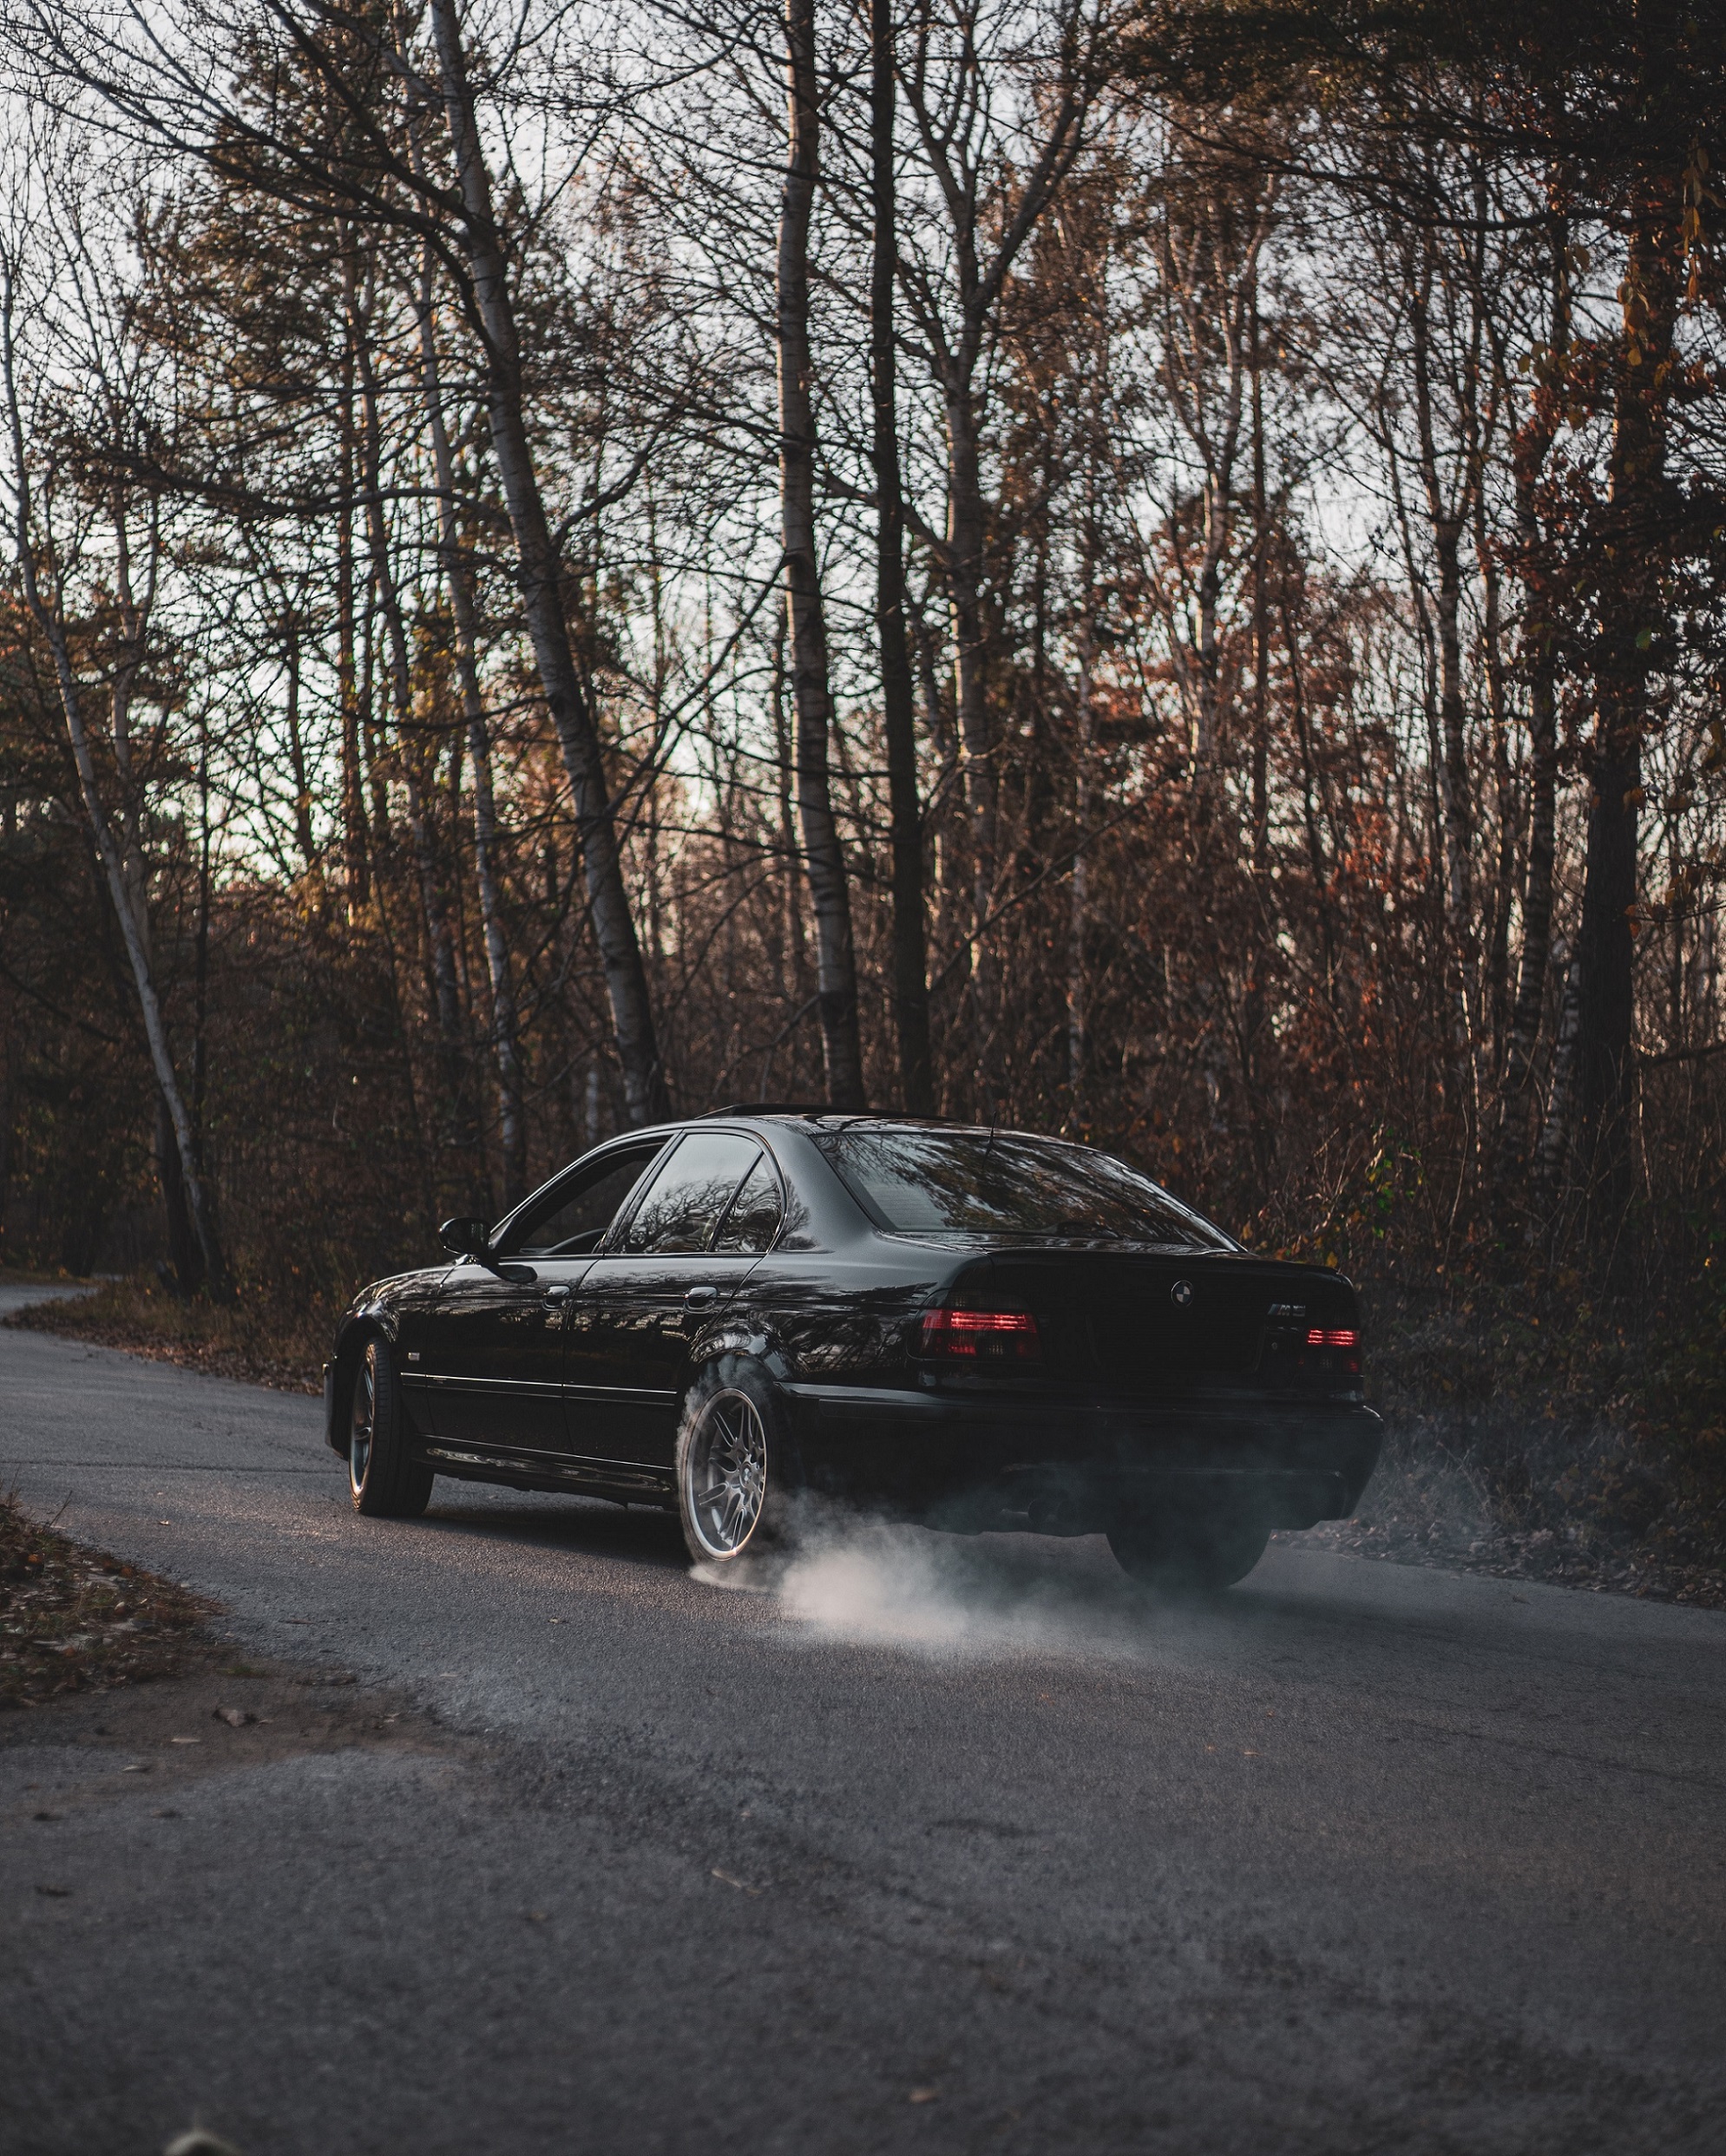 The rear 3/4 view of a black post-facelift BMW E39 M5 doing a burnout on a forest road